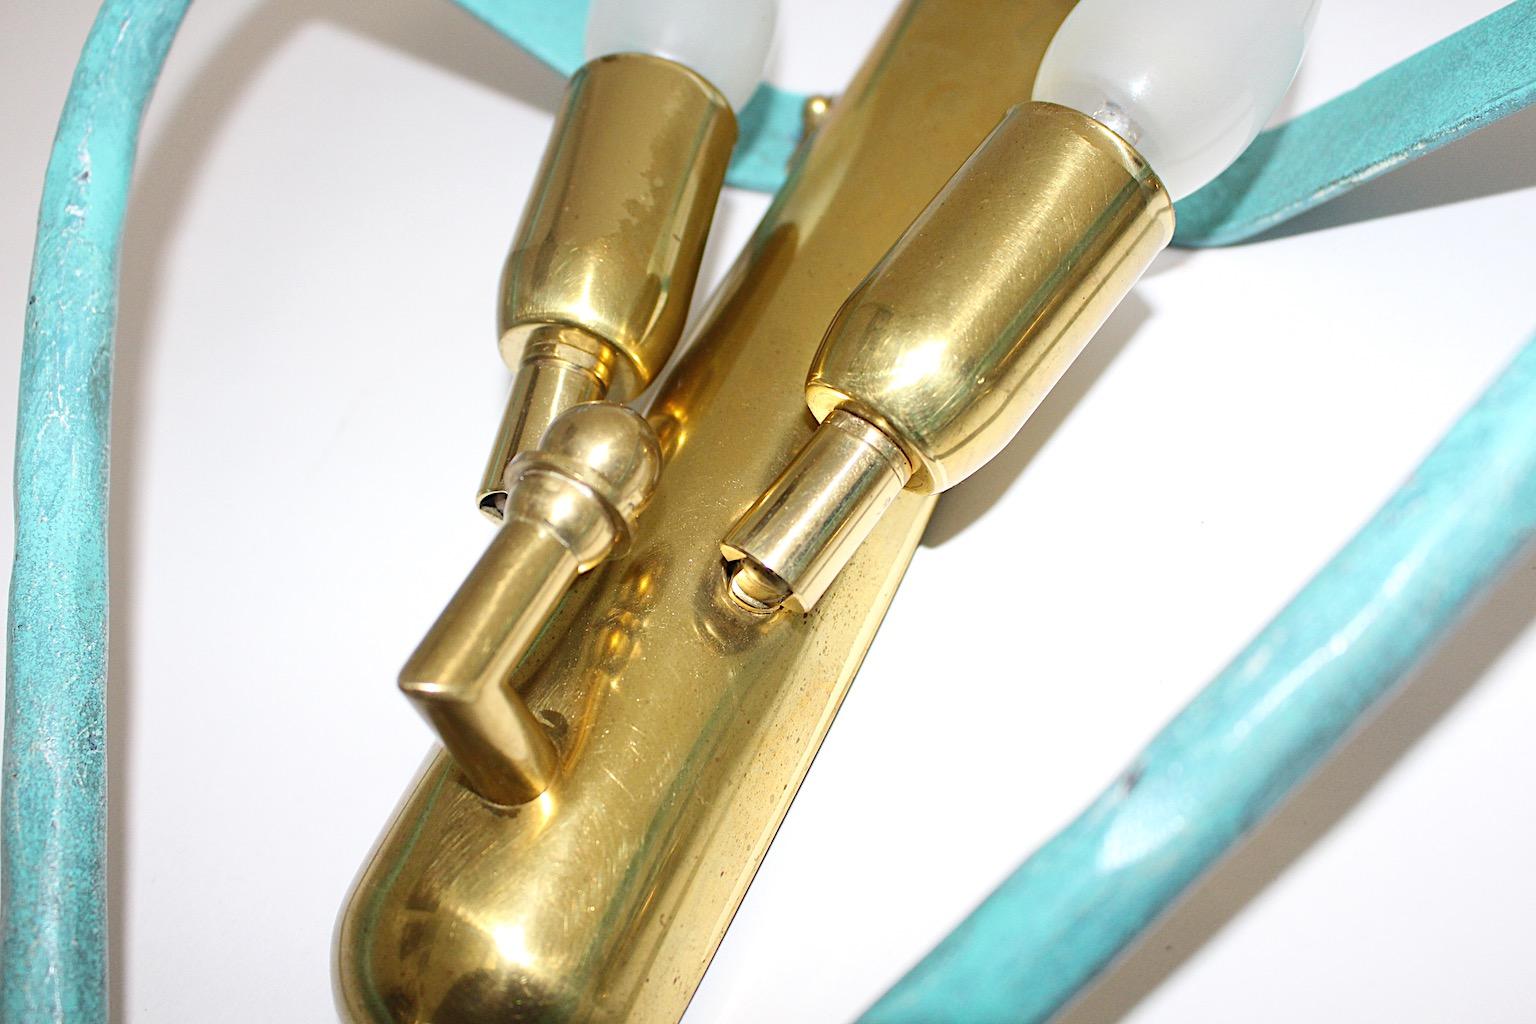 Italian Pair of Mid-Century Modern Vintage Blue Sconces with Brass Details, 1960 For Sale 10